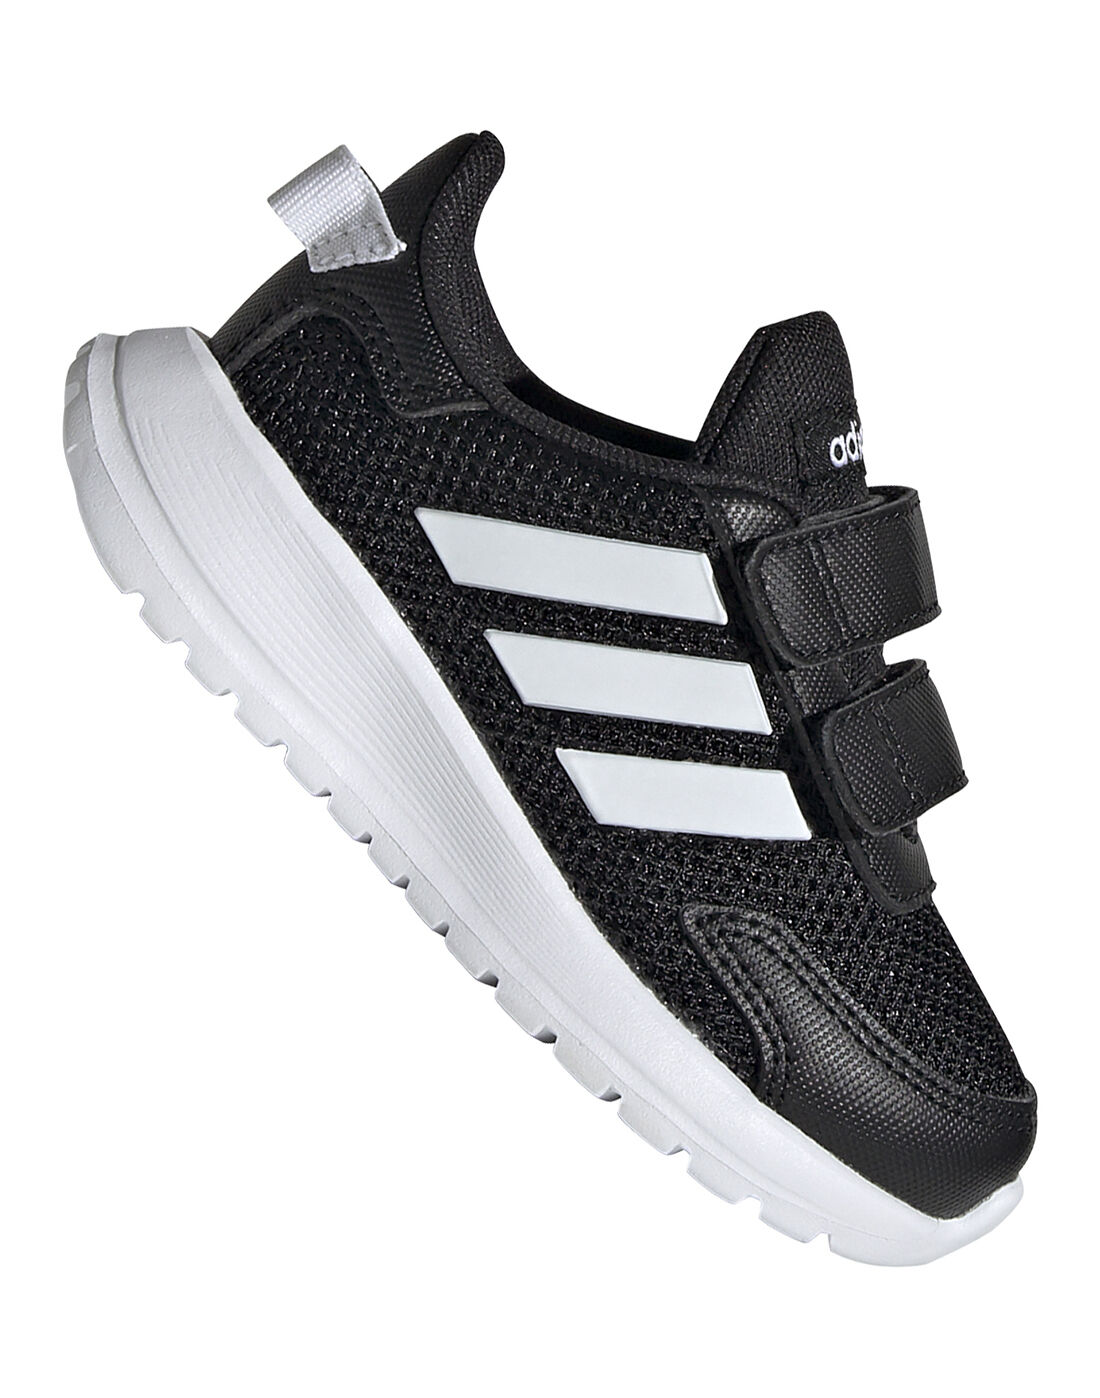 adidas boost shoes list